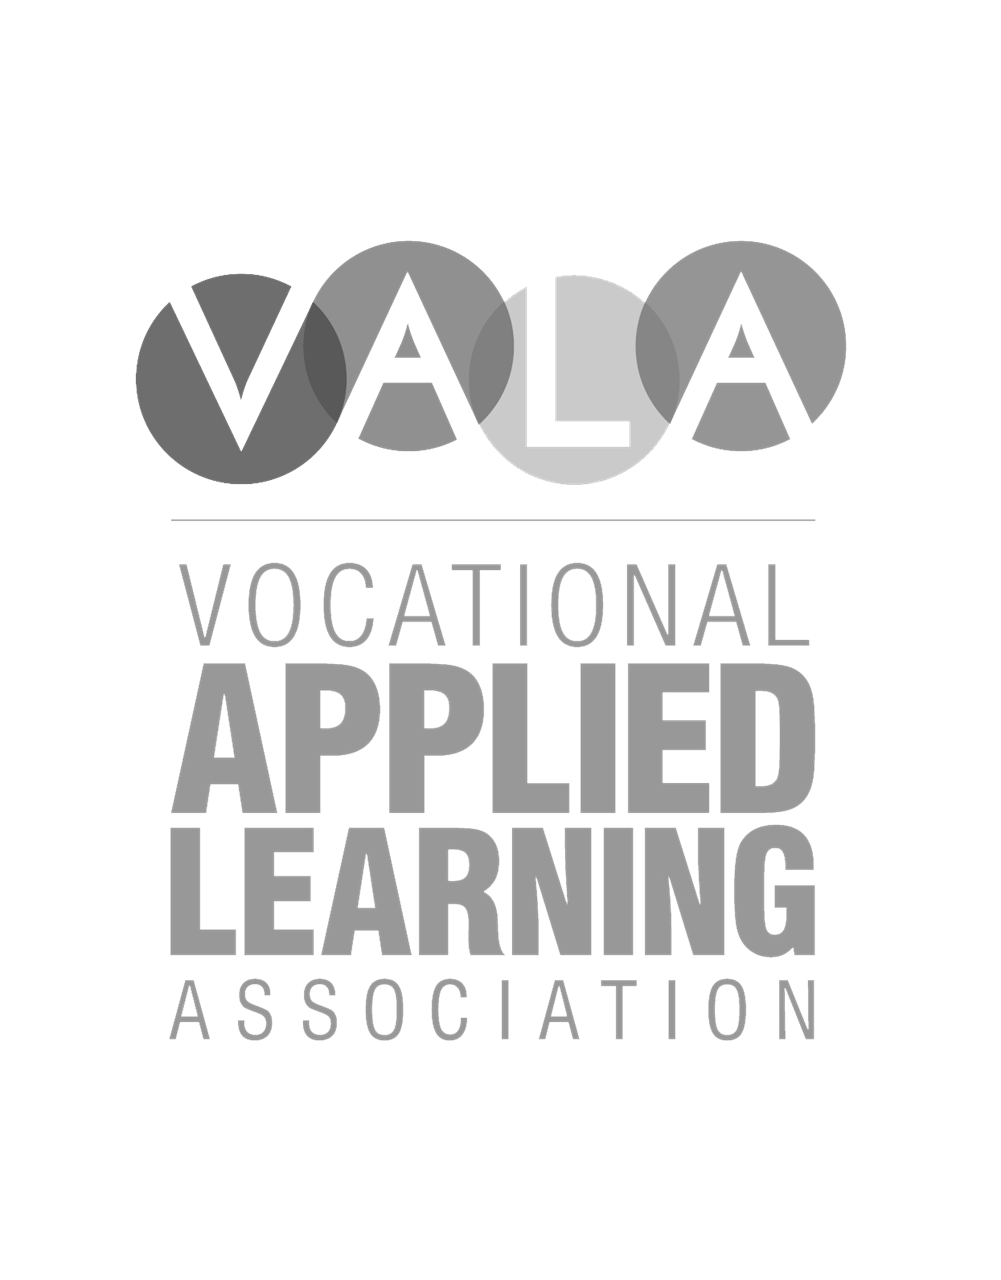 Vocational Applied Learning Association